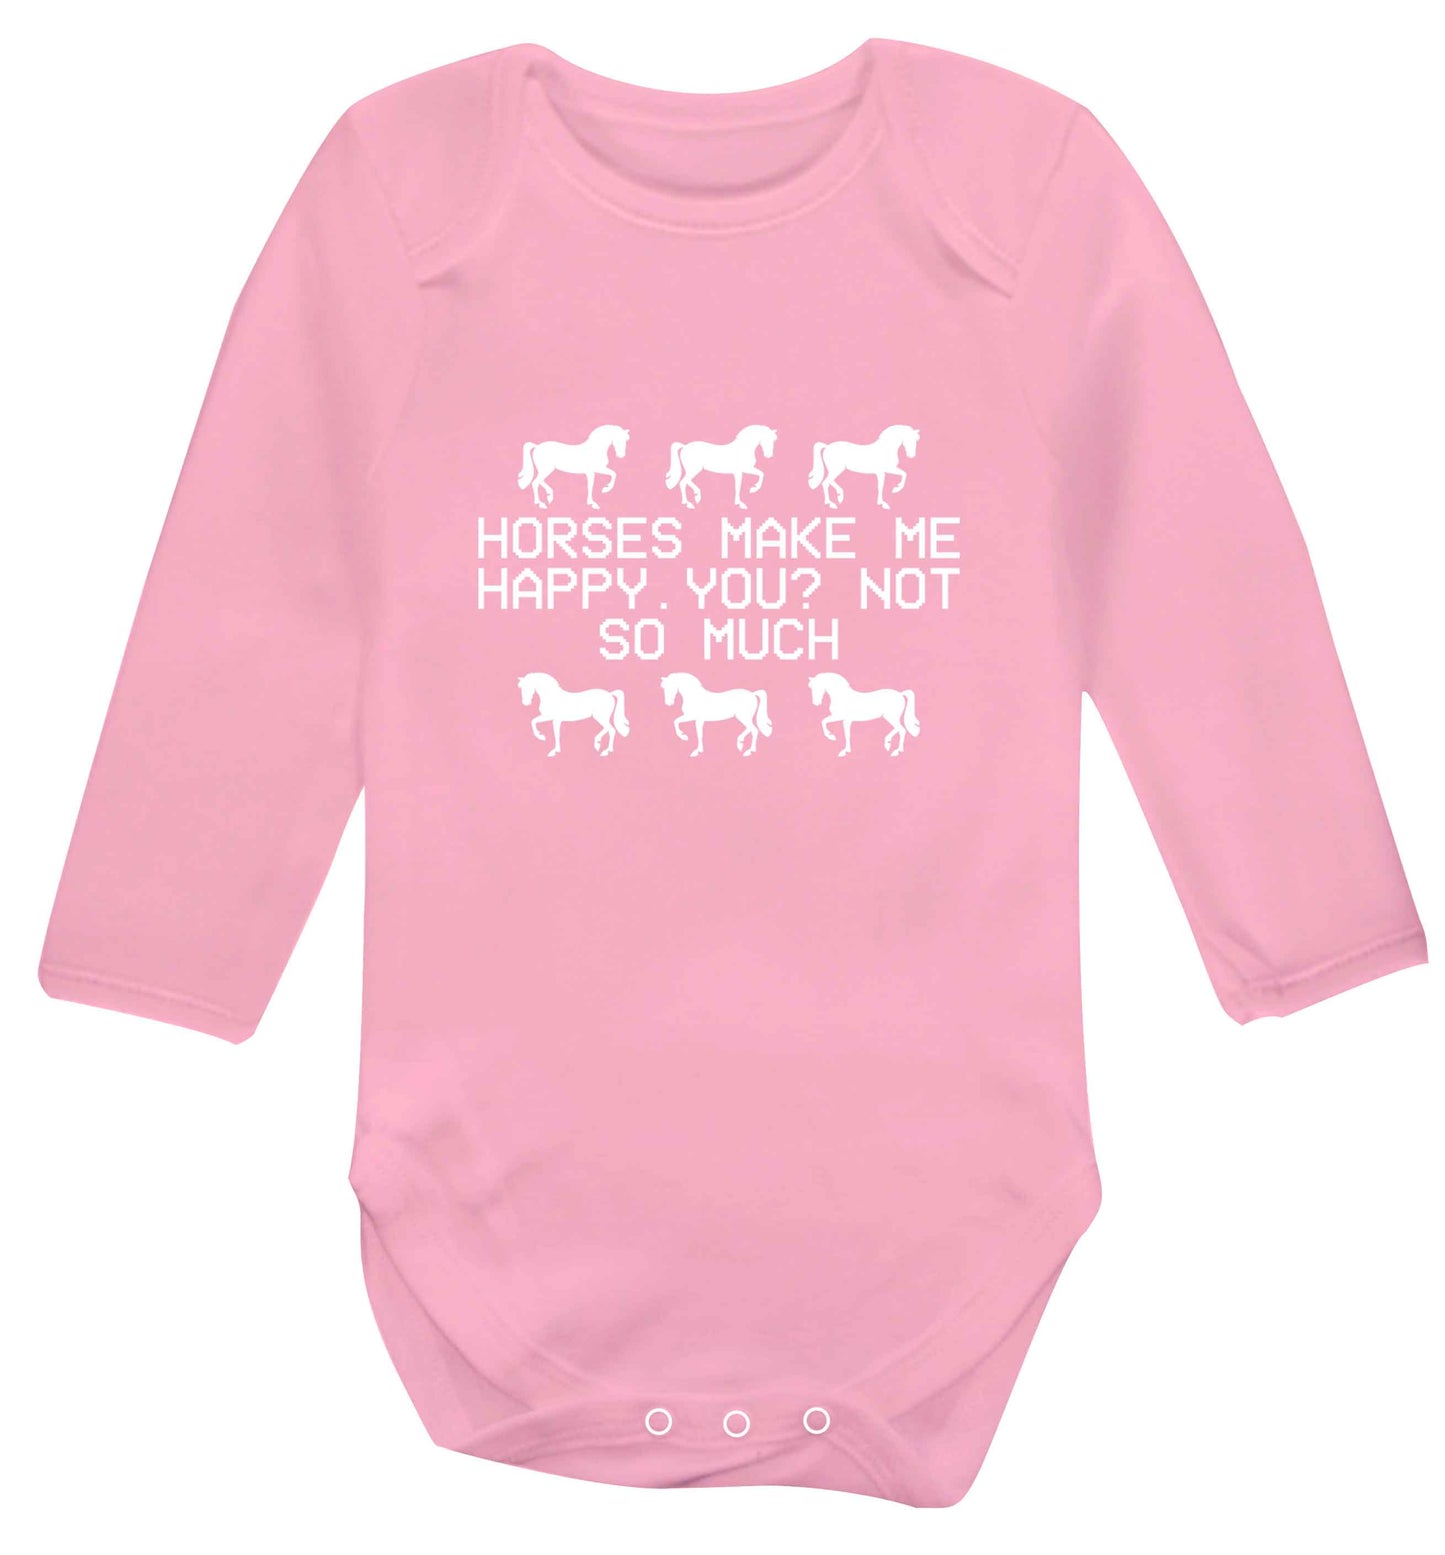 Horses make me happy, you not so much baby vest long sleeved pale pink 6-12 months